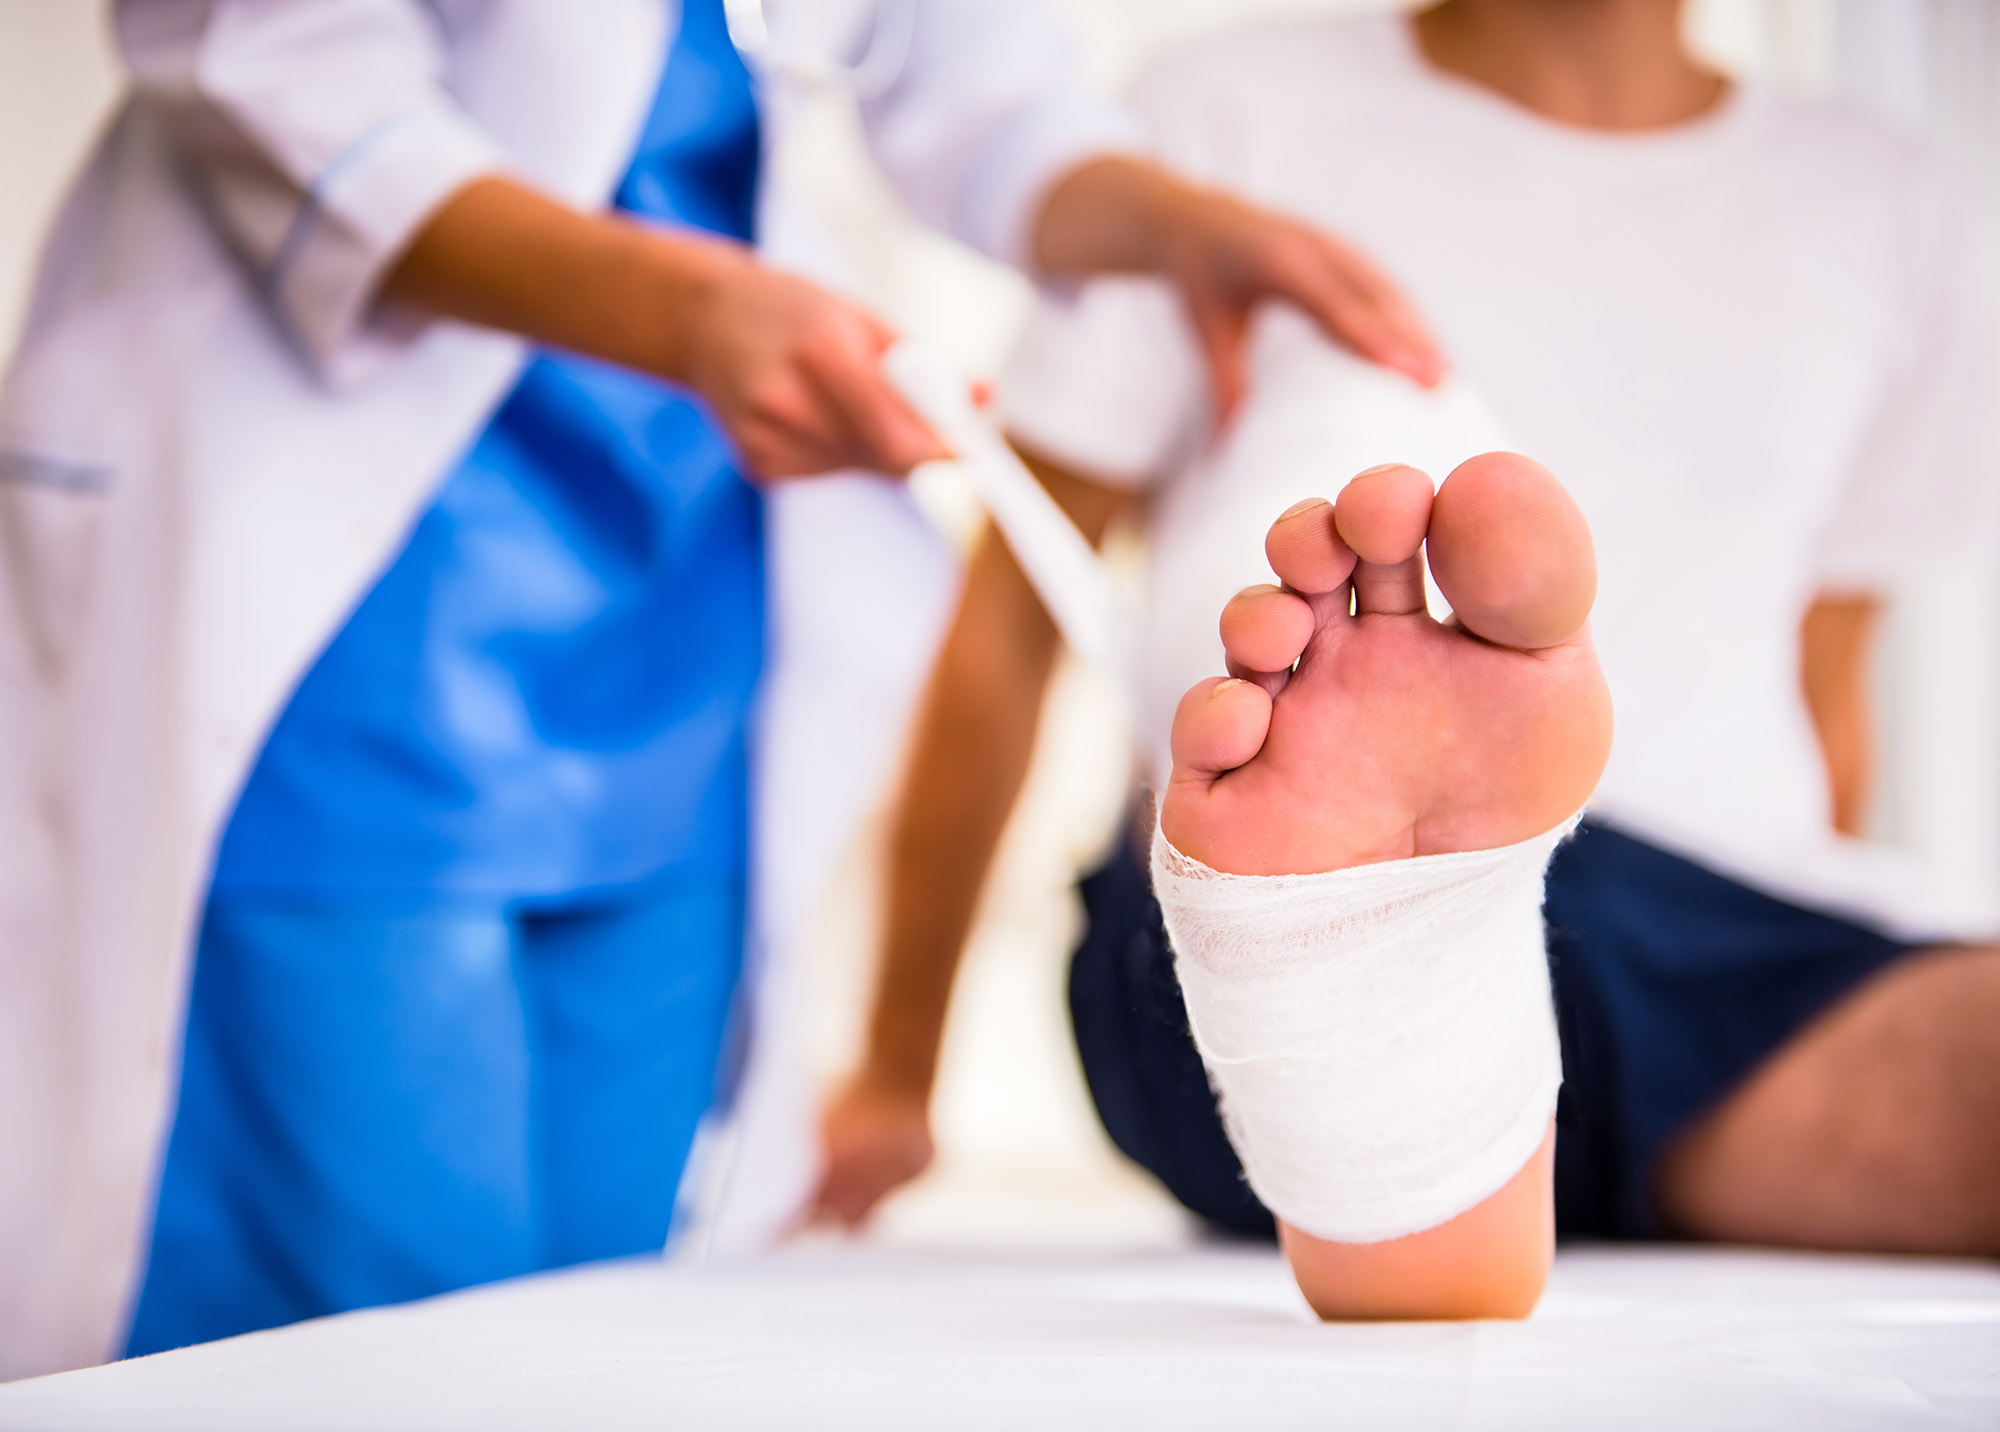 foot injury compensation solicitors Bristol, crush foot claims